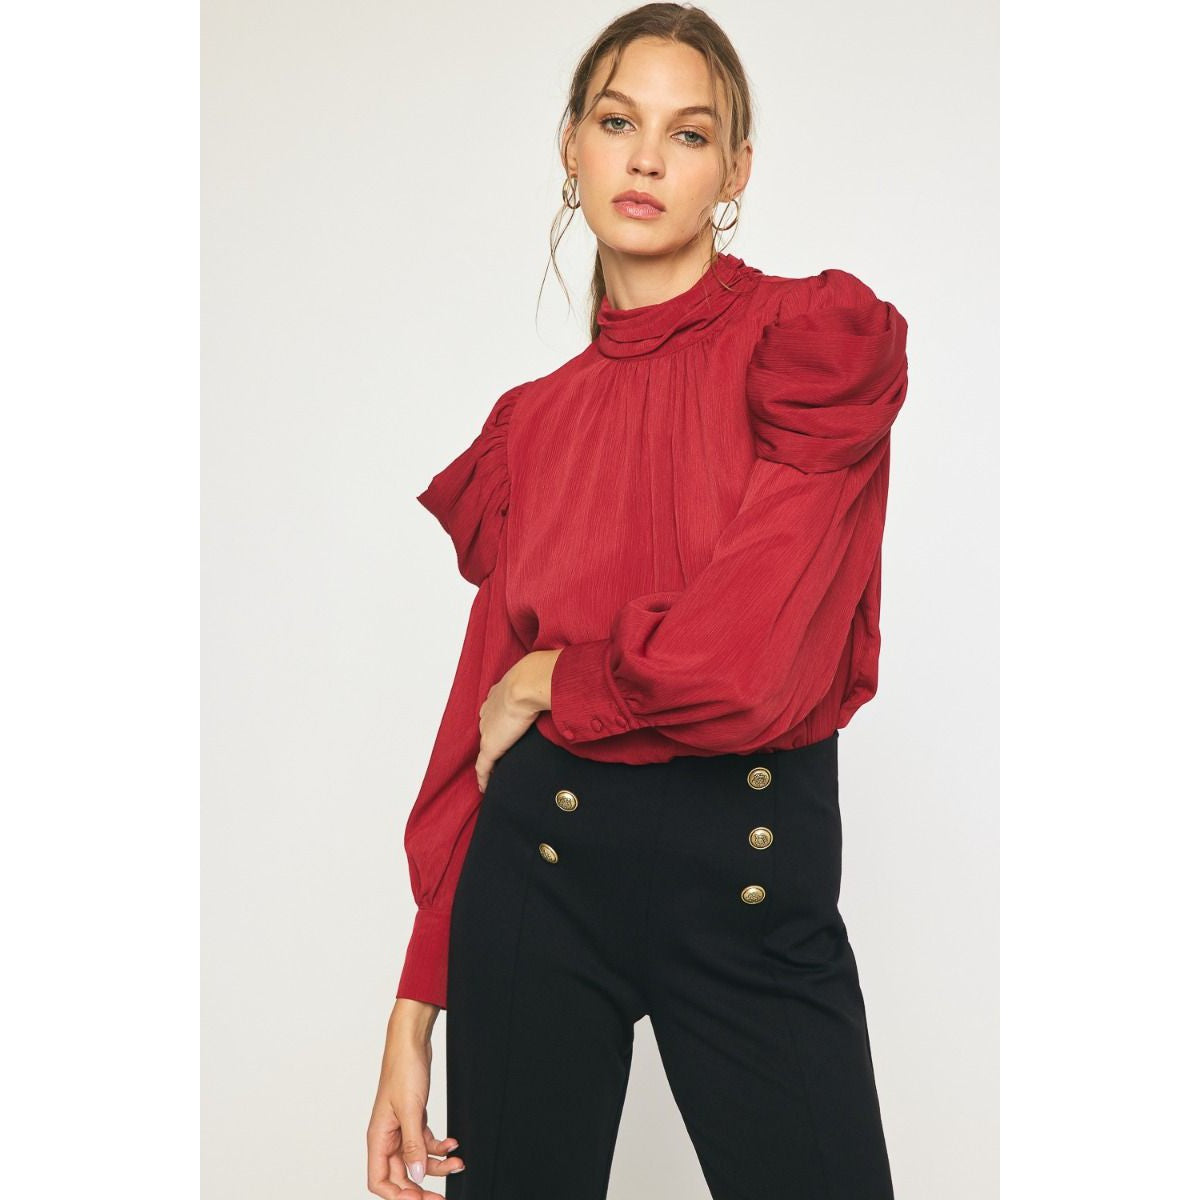 Sybil Top Red